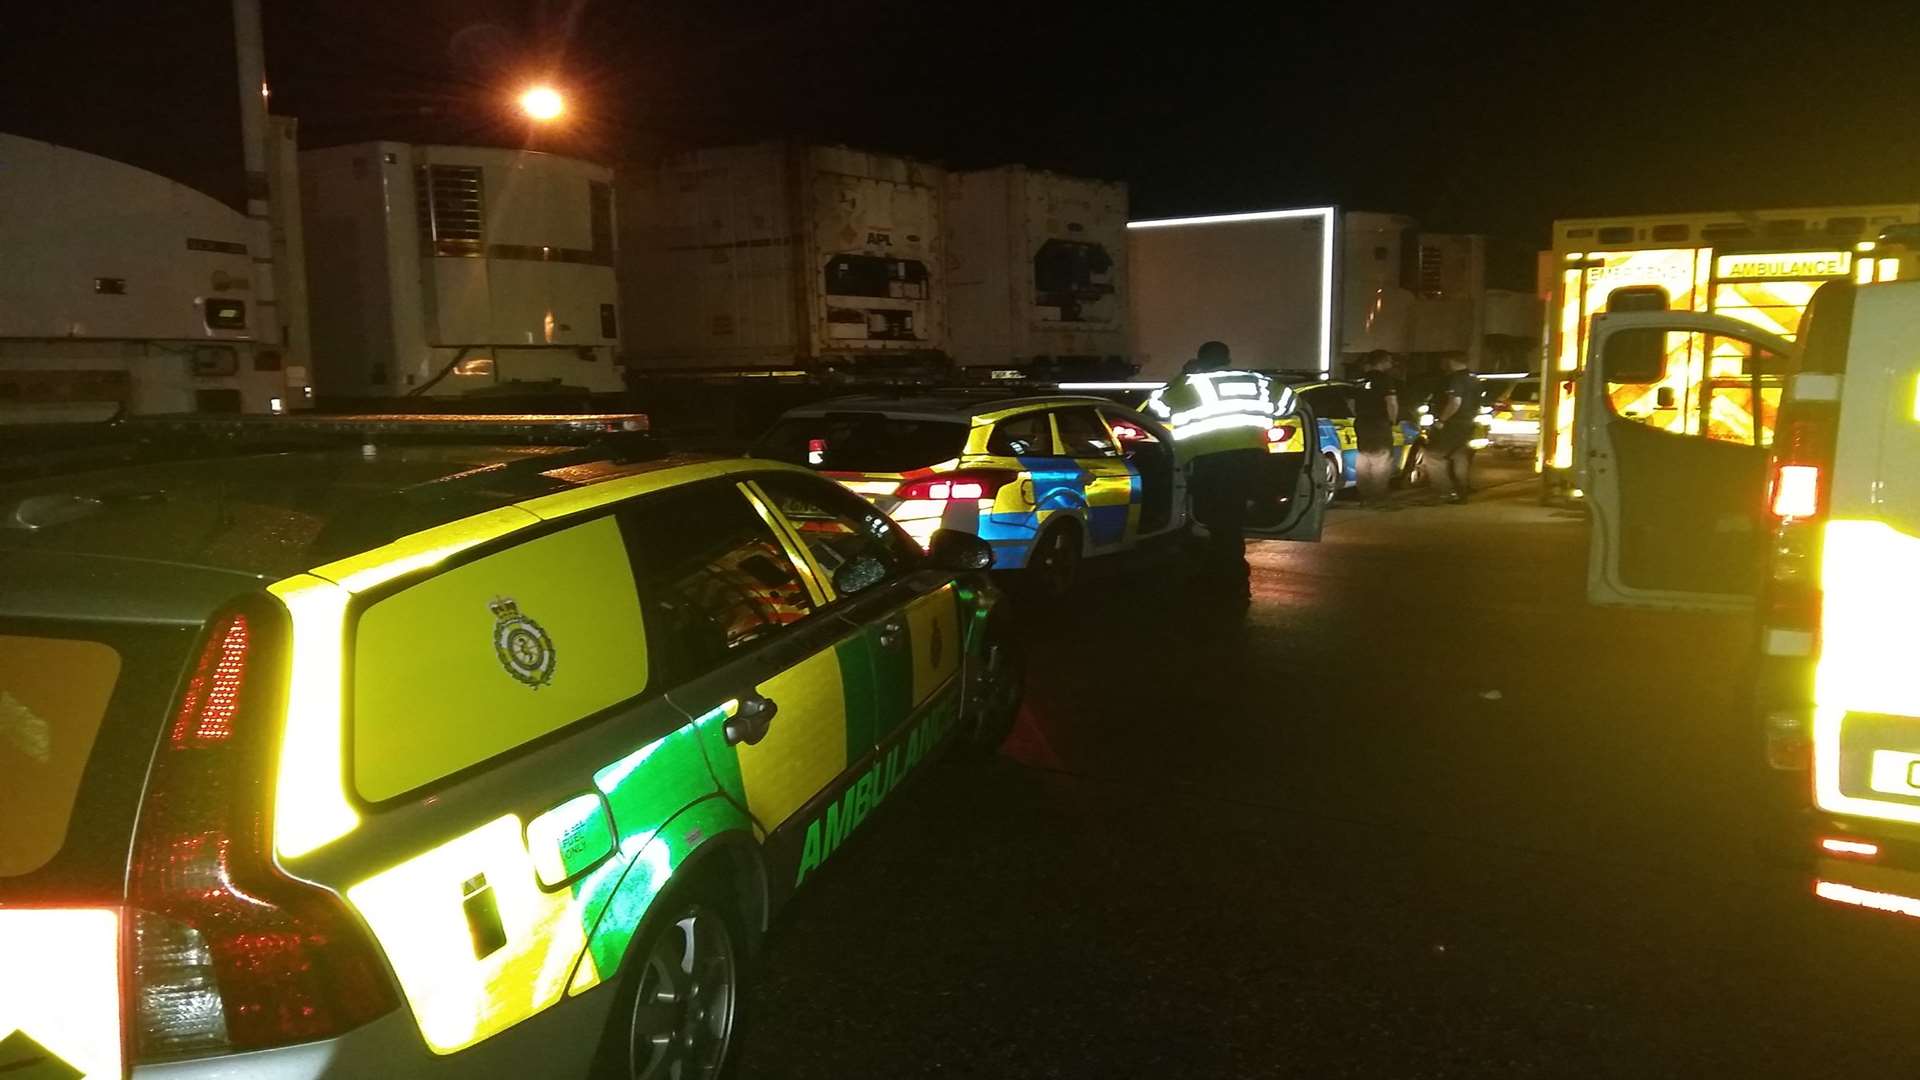 The asylum seekers were discovered in a lorry in Swale. Picture via @kentspecials